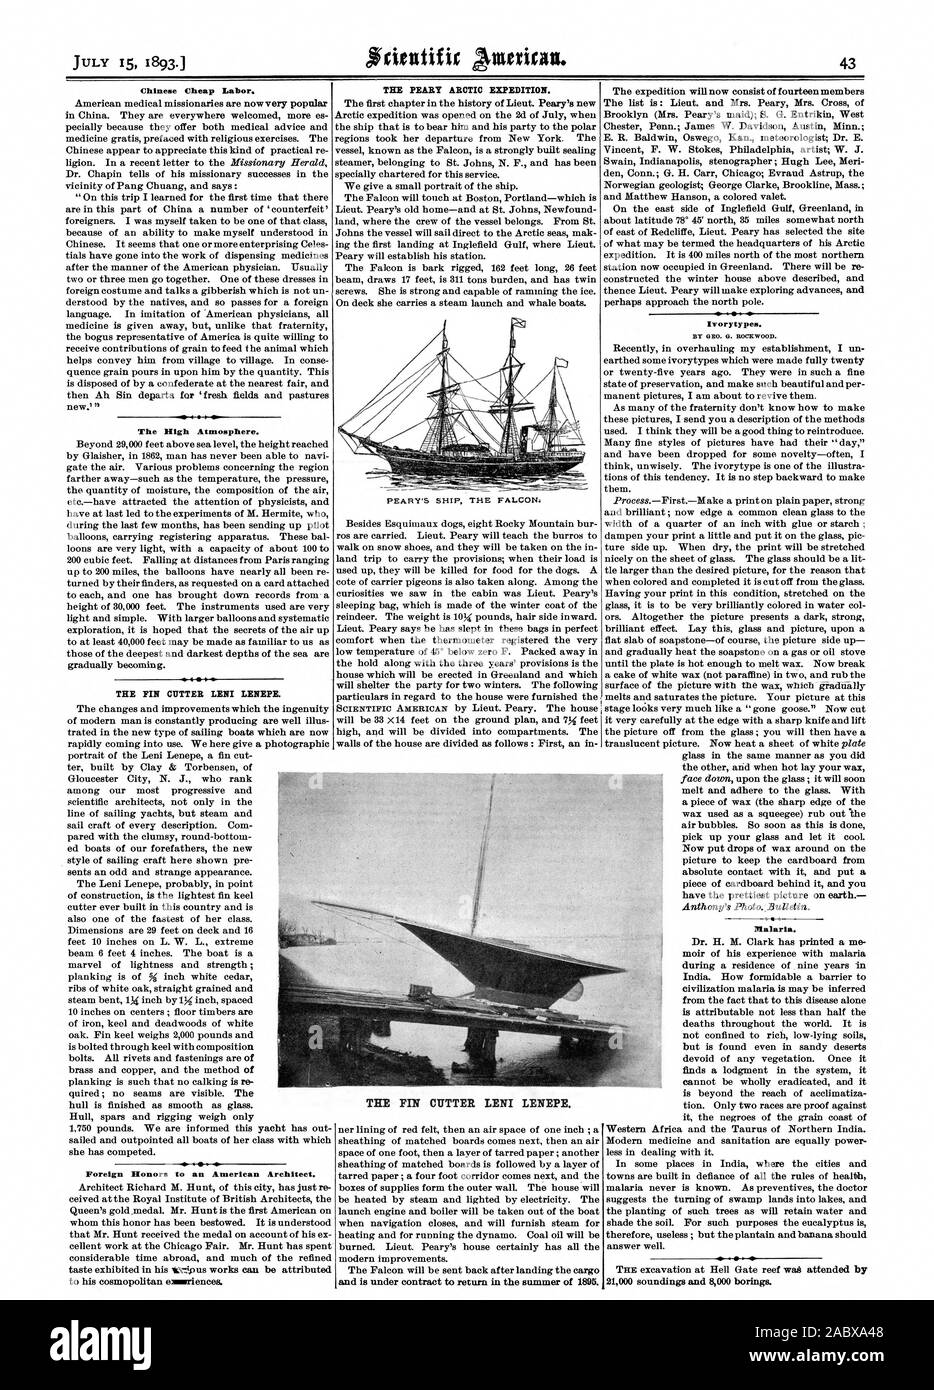 Chinese Cheap Labor. The High Atmosphere. THE FIN CUTTER LENI LENEPE. Foreign Honors to an American Architect. THE PEAR! ARCTIC EXPEDITION. PEARY'S SHIP THE FALCON Ivorytypes. BY GEO. G. ROCKWOOD. Malaria. THE FIN CUTTER LENI LENEPE., scientific american, 1893-07-15 Stock Photo